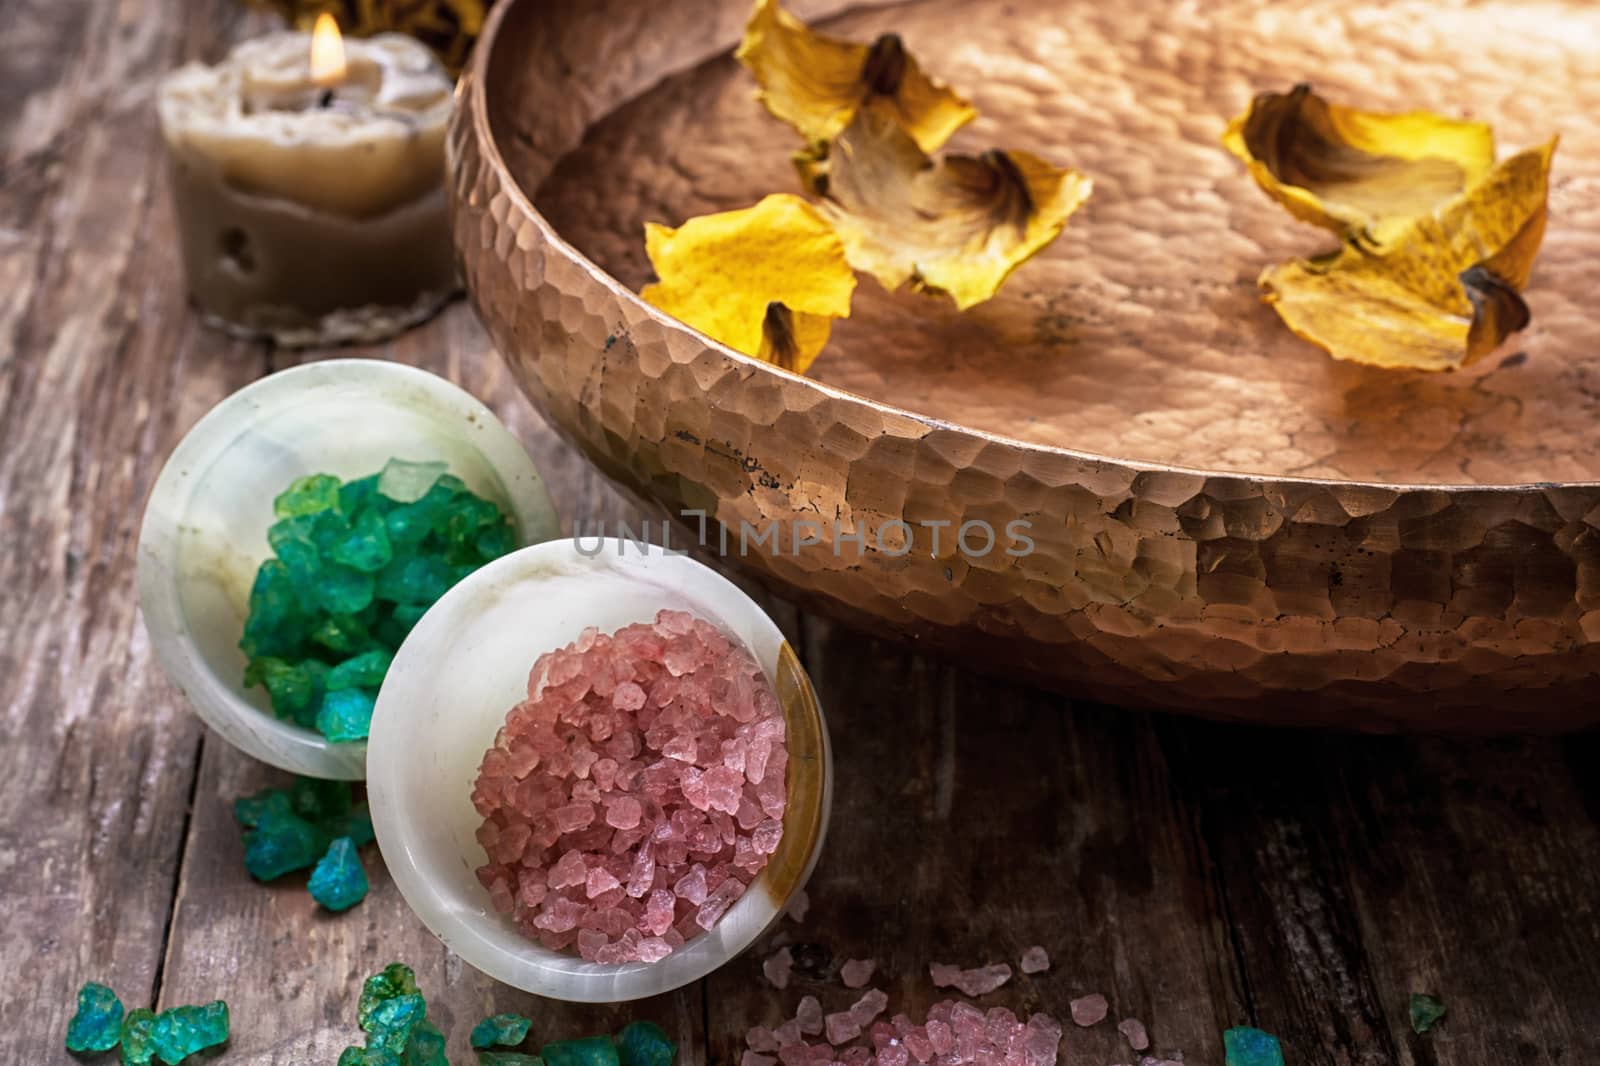 sea salt and accessories for a rejuvenating Spa sessions